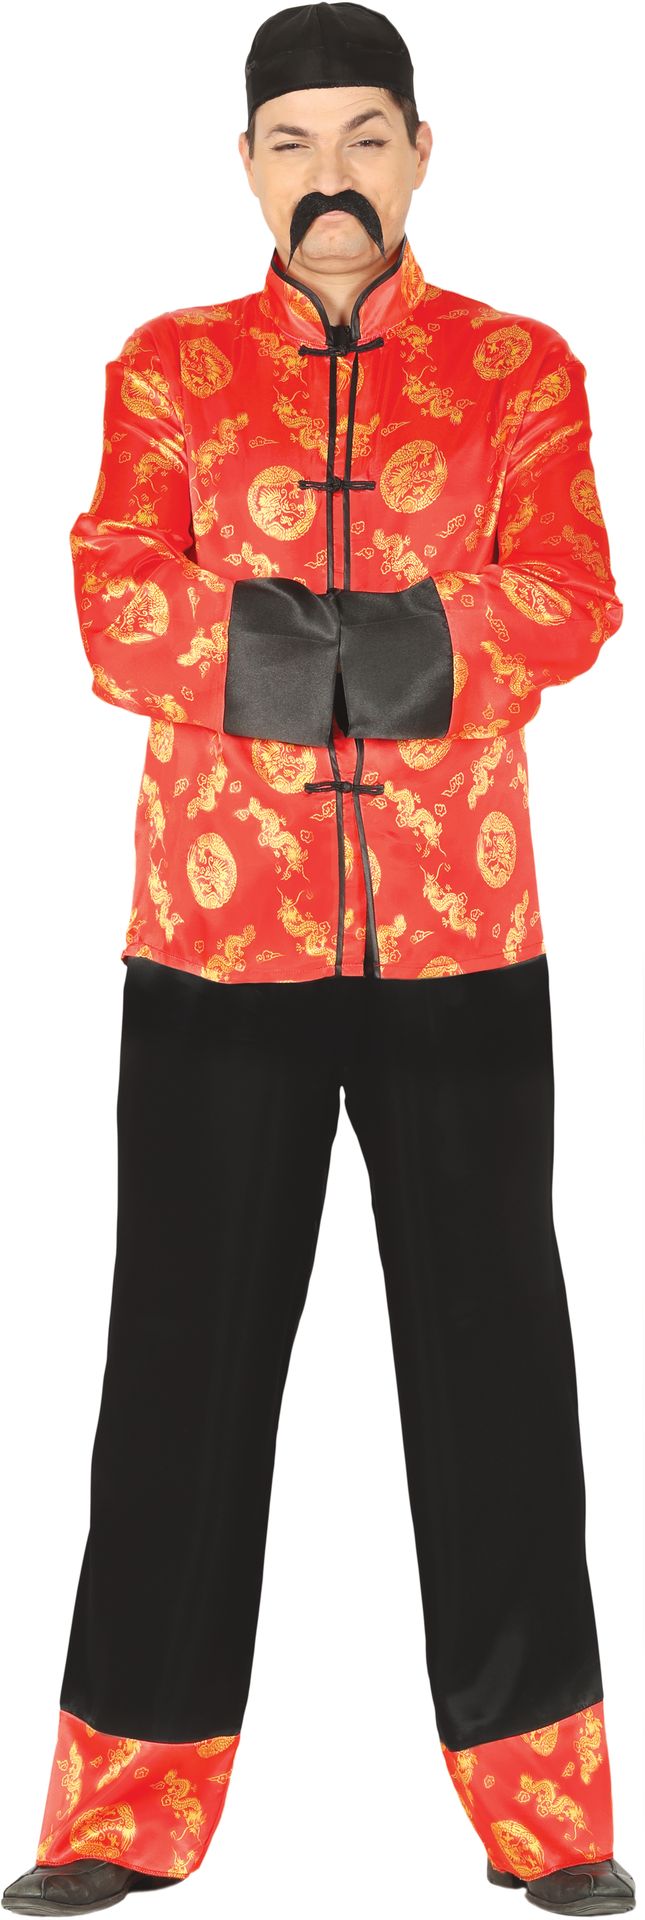 Chinese man outfit